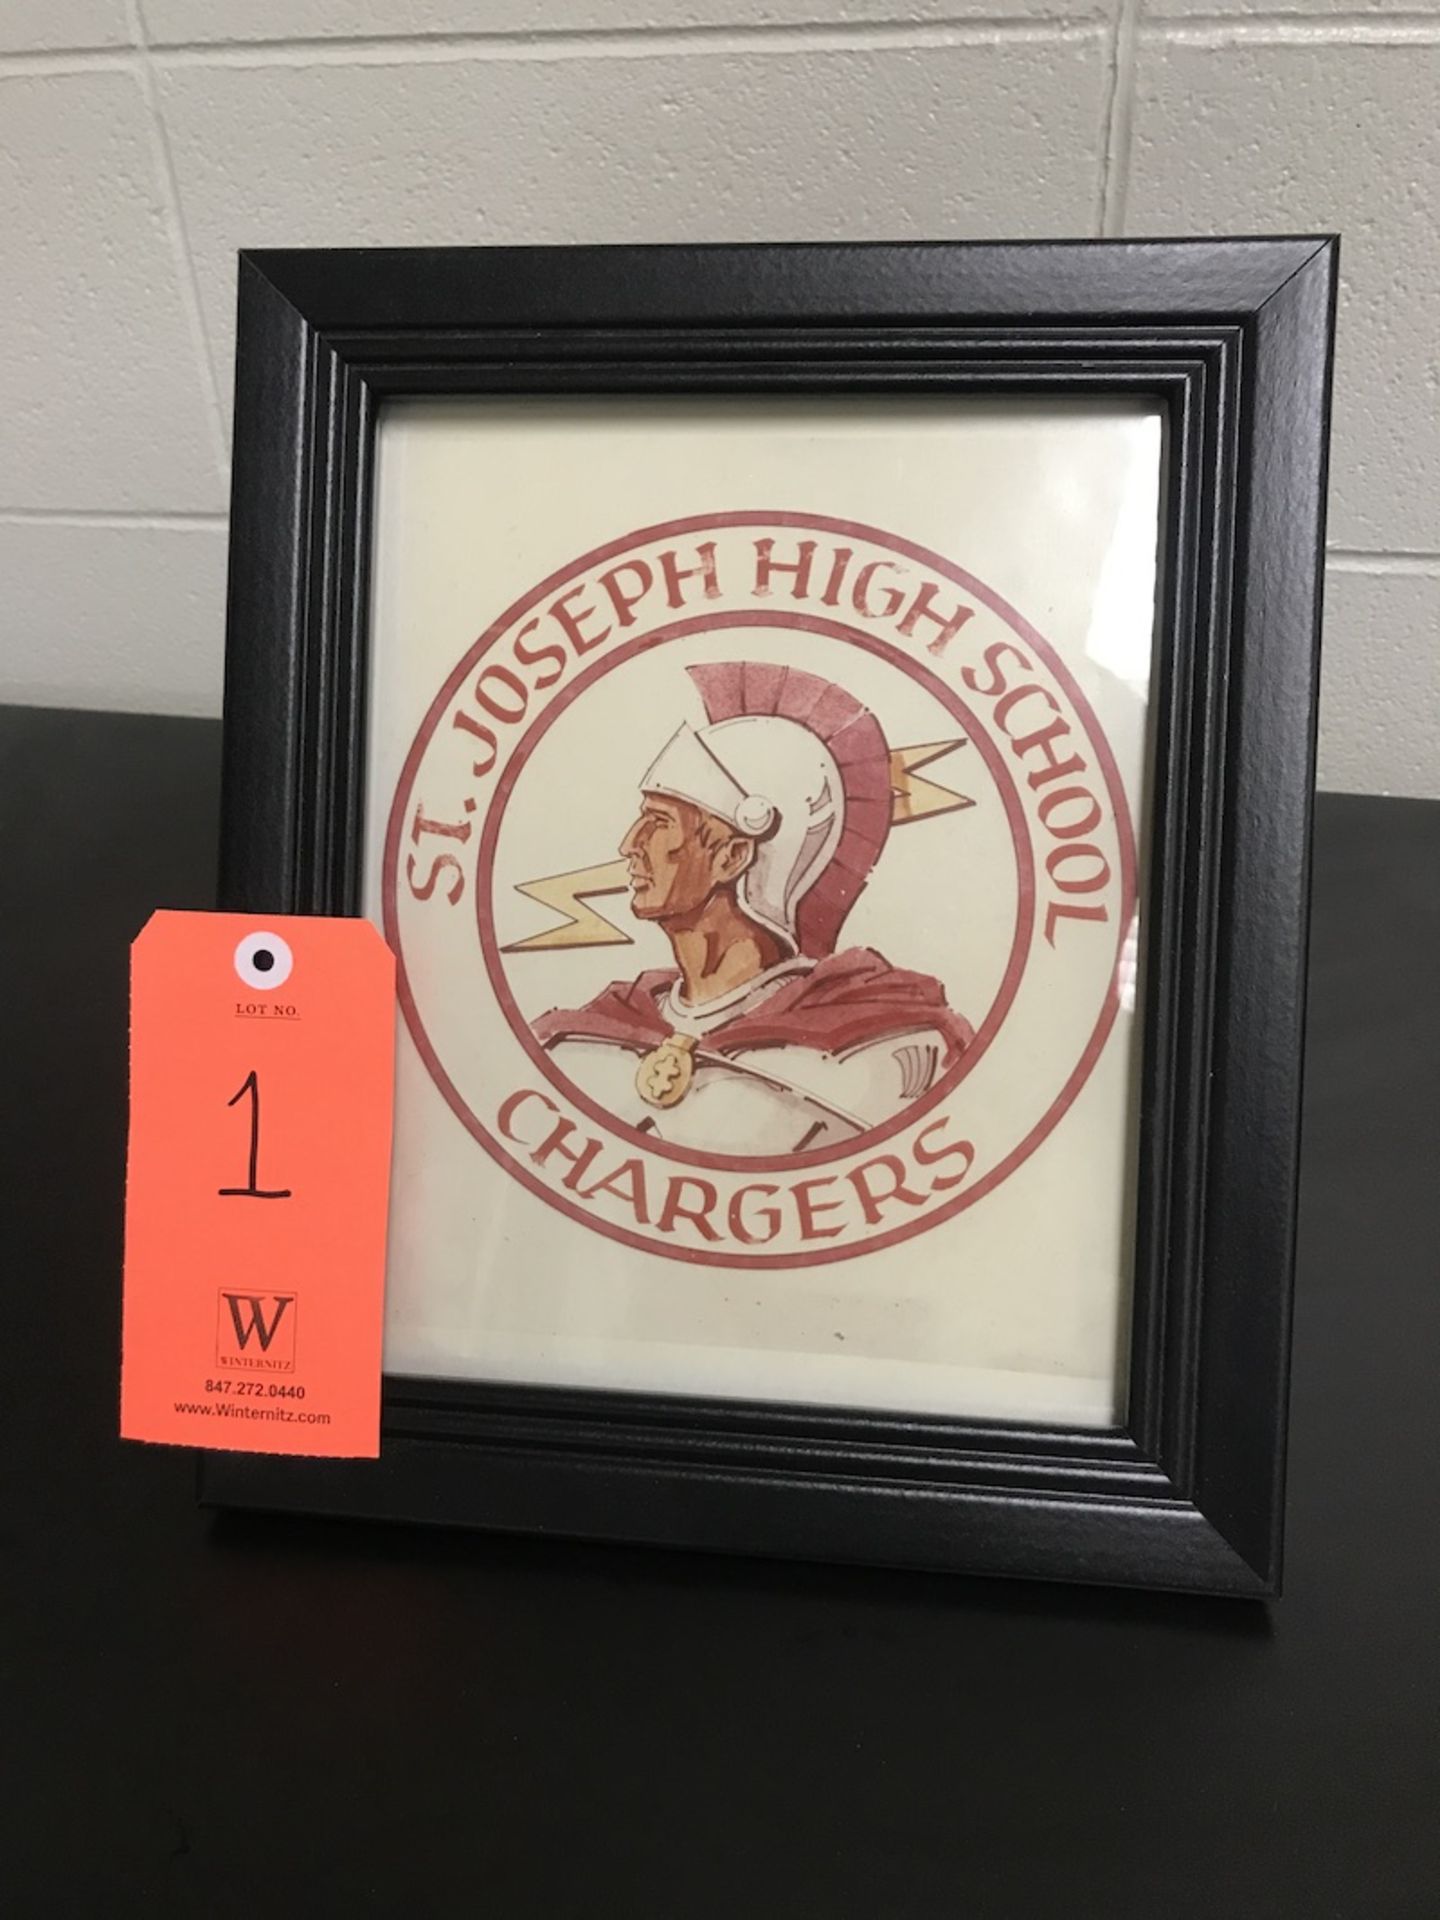 Framed St. Joseph Chargers Picture (Room 310)